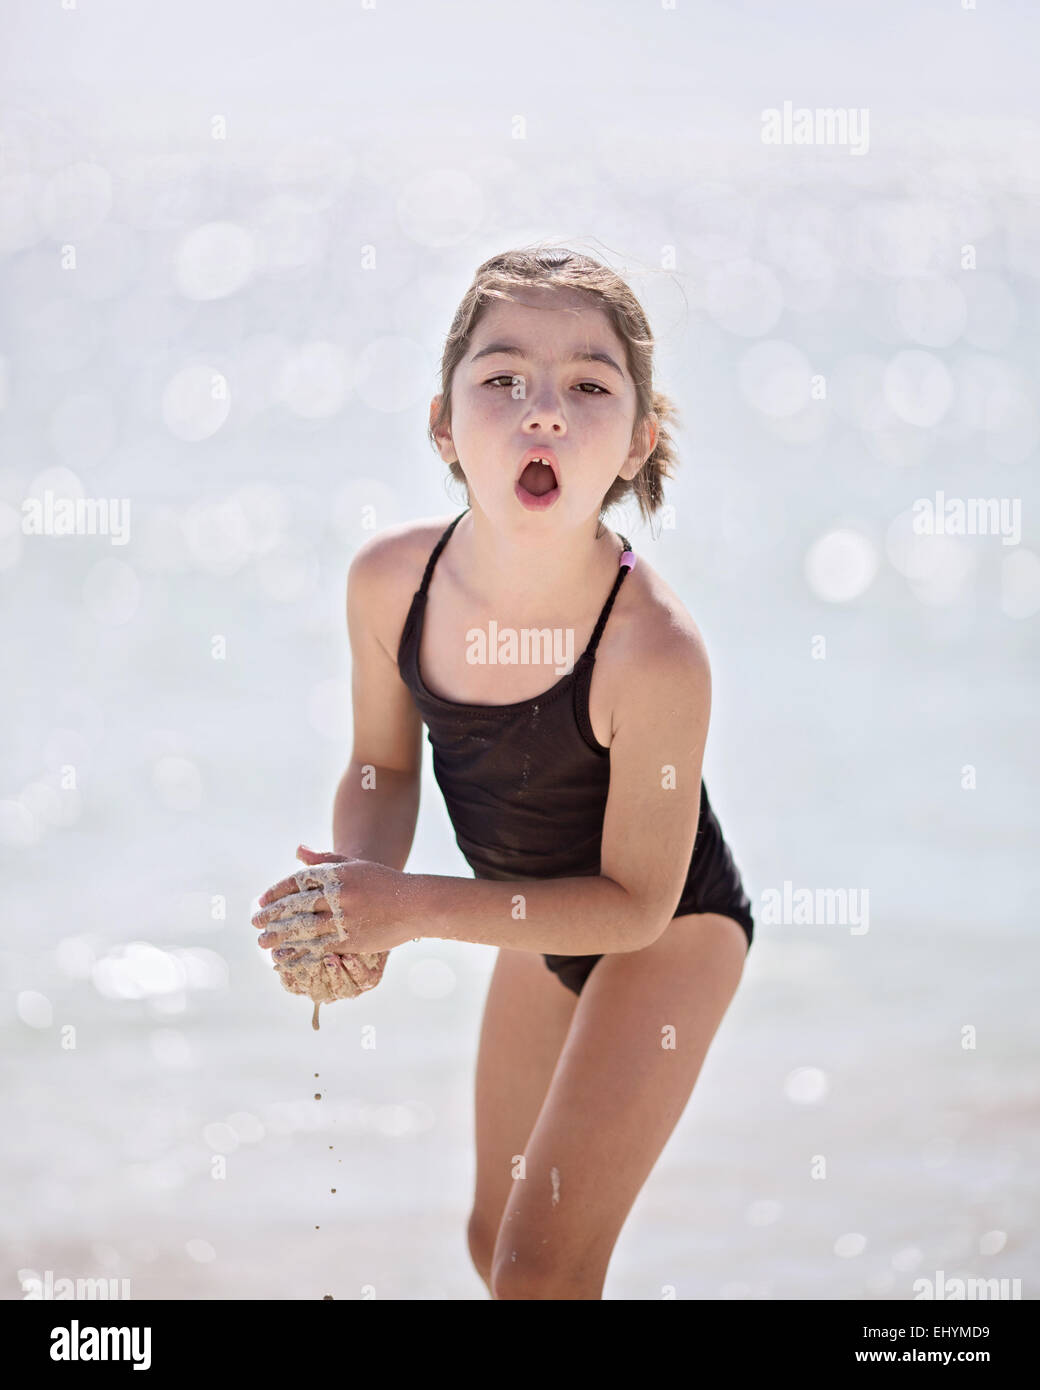 Girl standing on beach playing with wet sand, Mexico Stock Photo